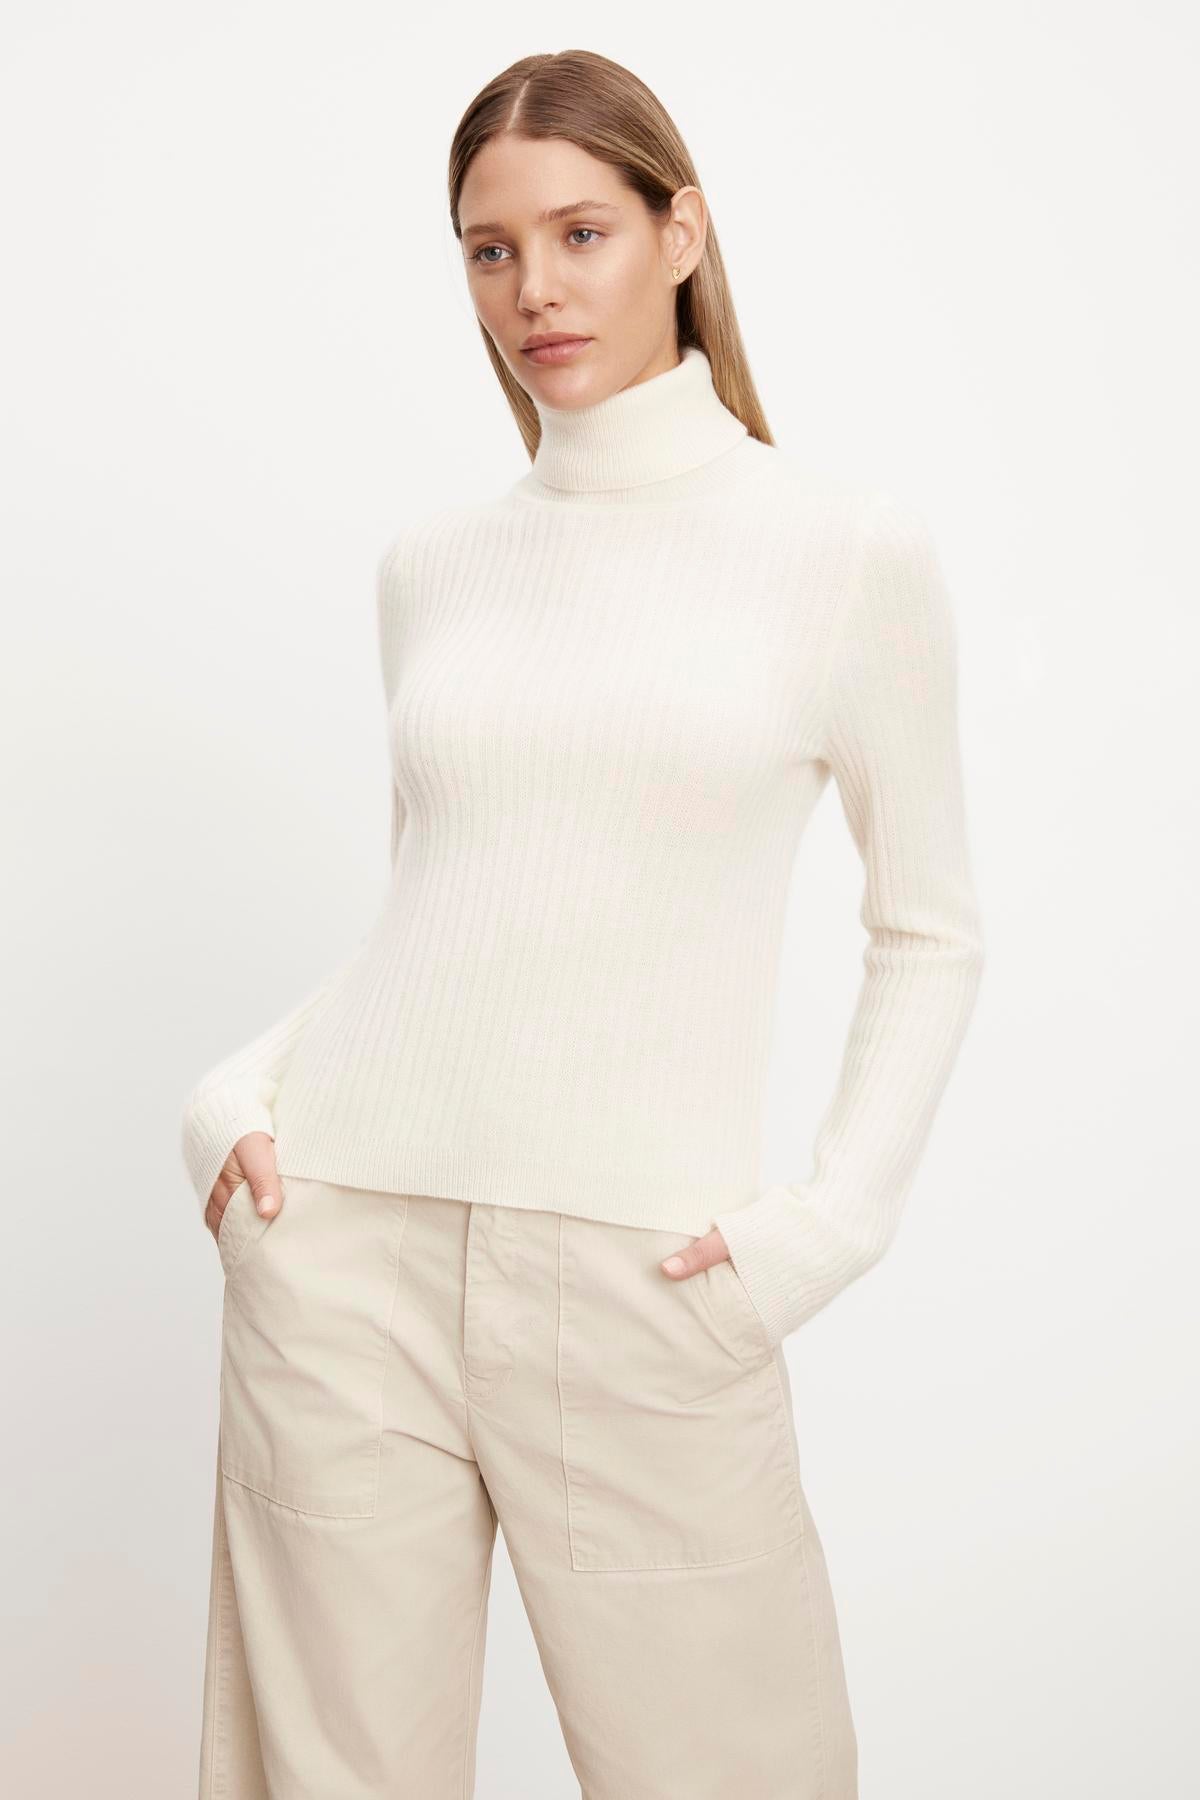   The model is wearing a LORI CASHMERE TURTLENECK SWEATER by Velvet by Graham & Spencer and beige trousers. 